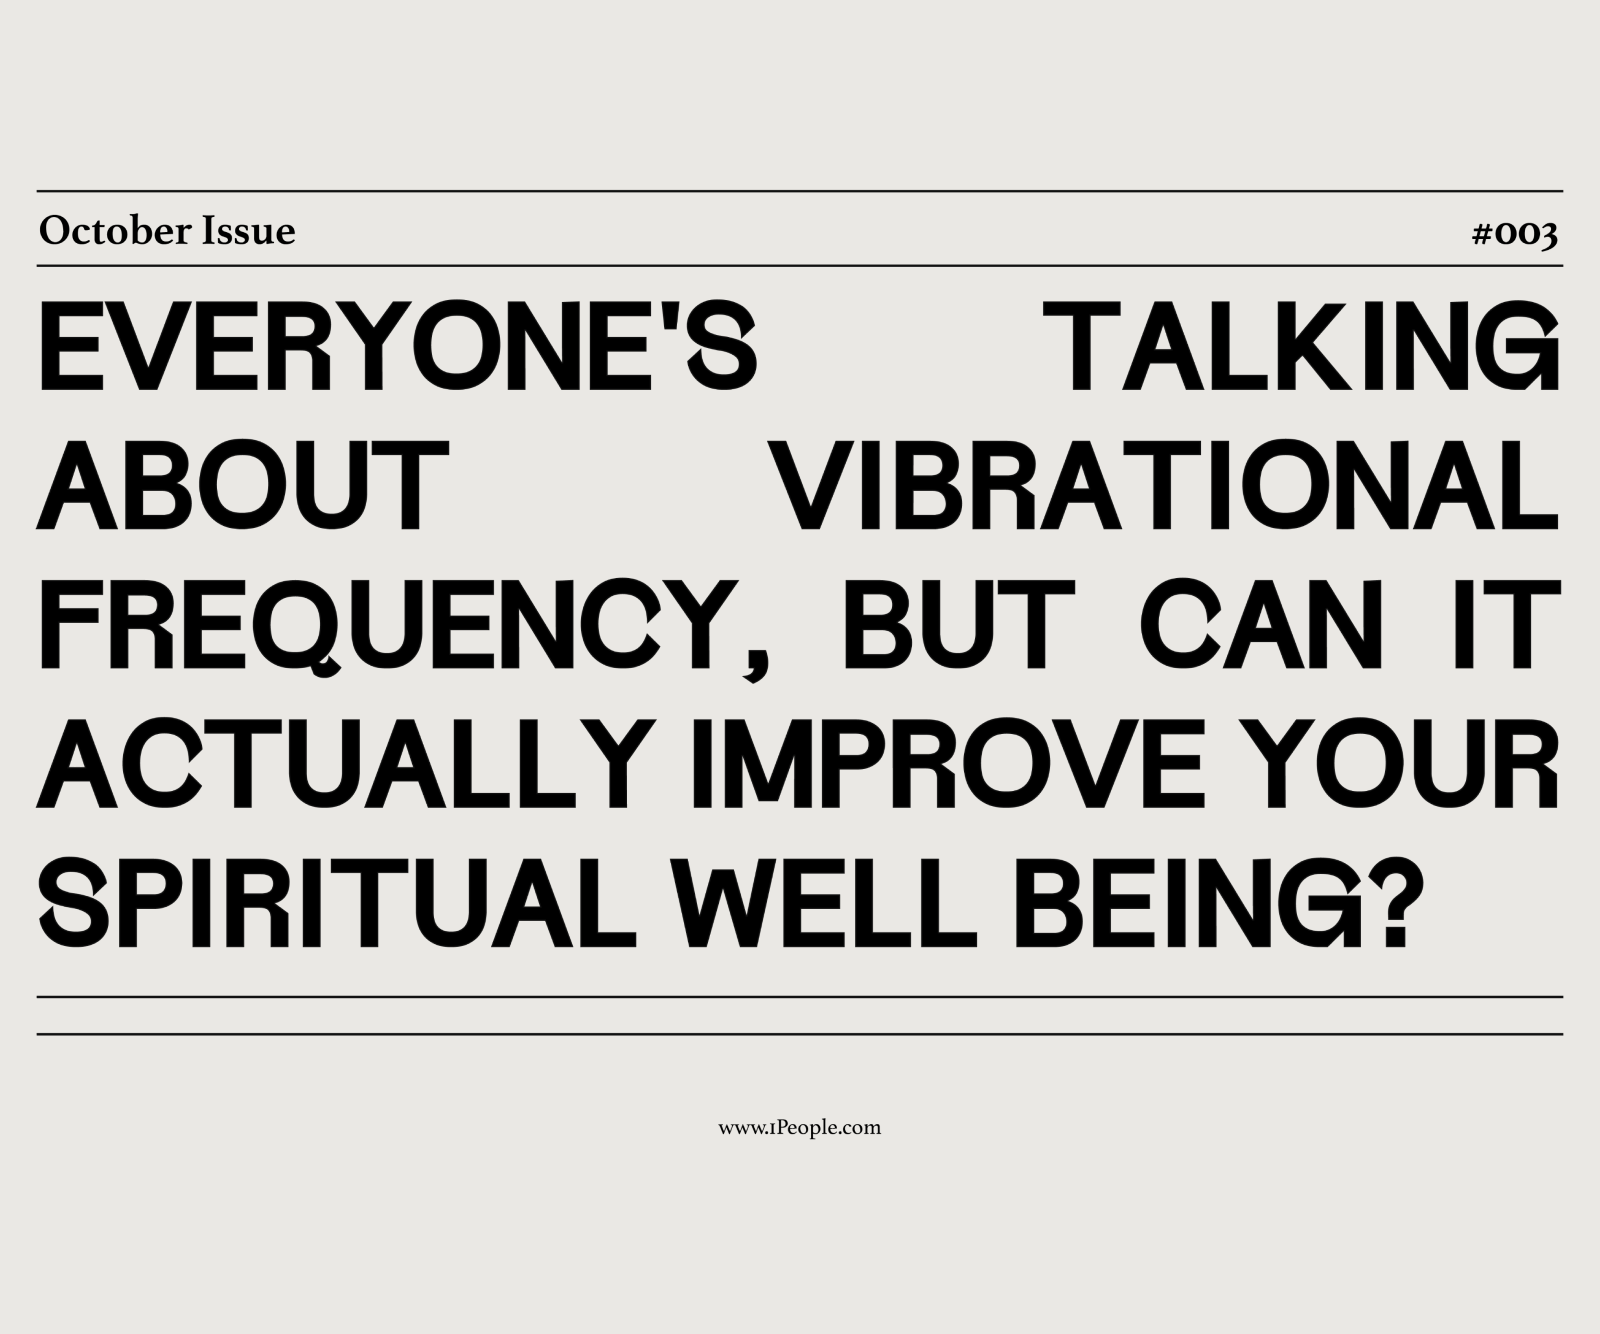 Can Vibrational Frequency Improve Spiritual Wellbeing?